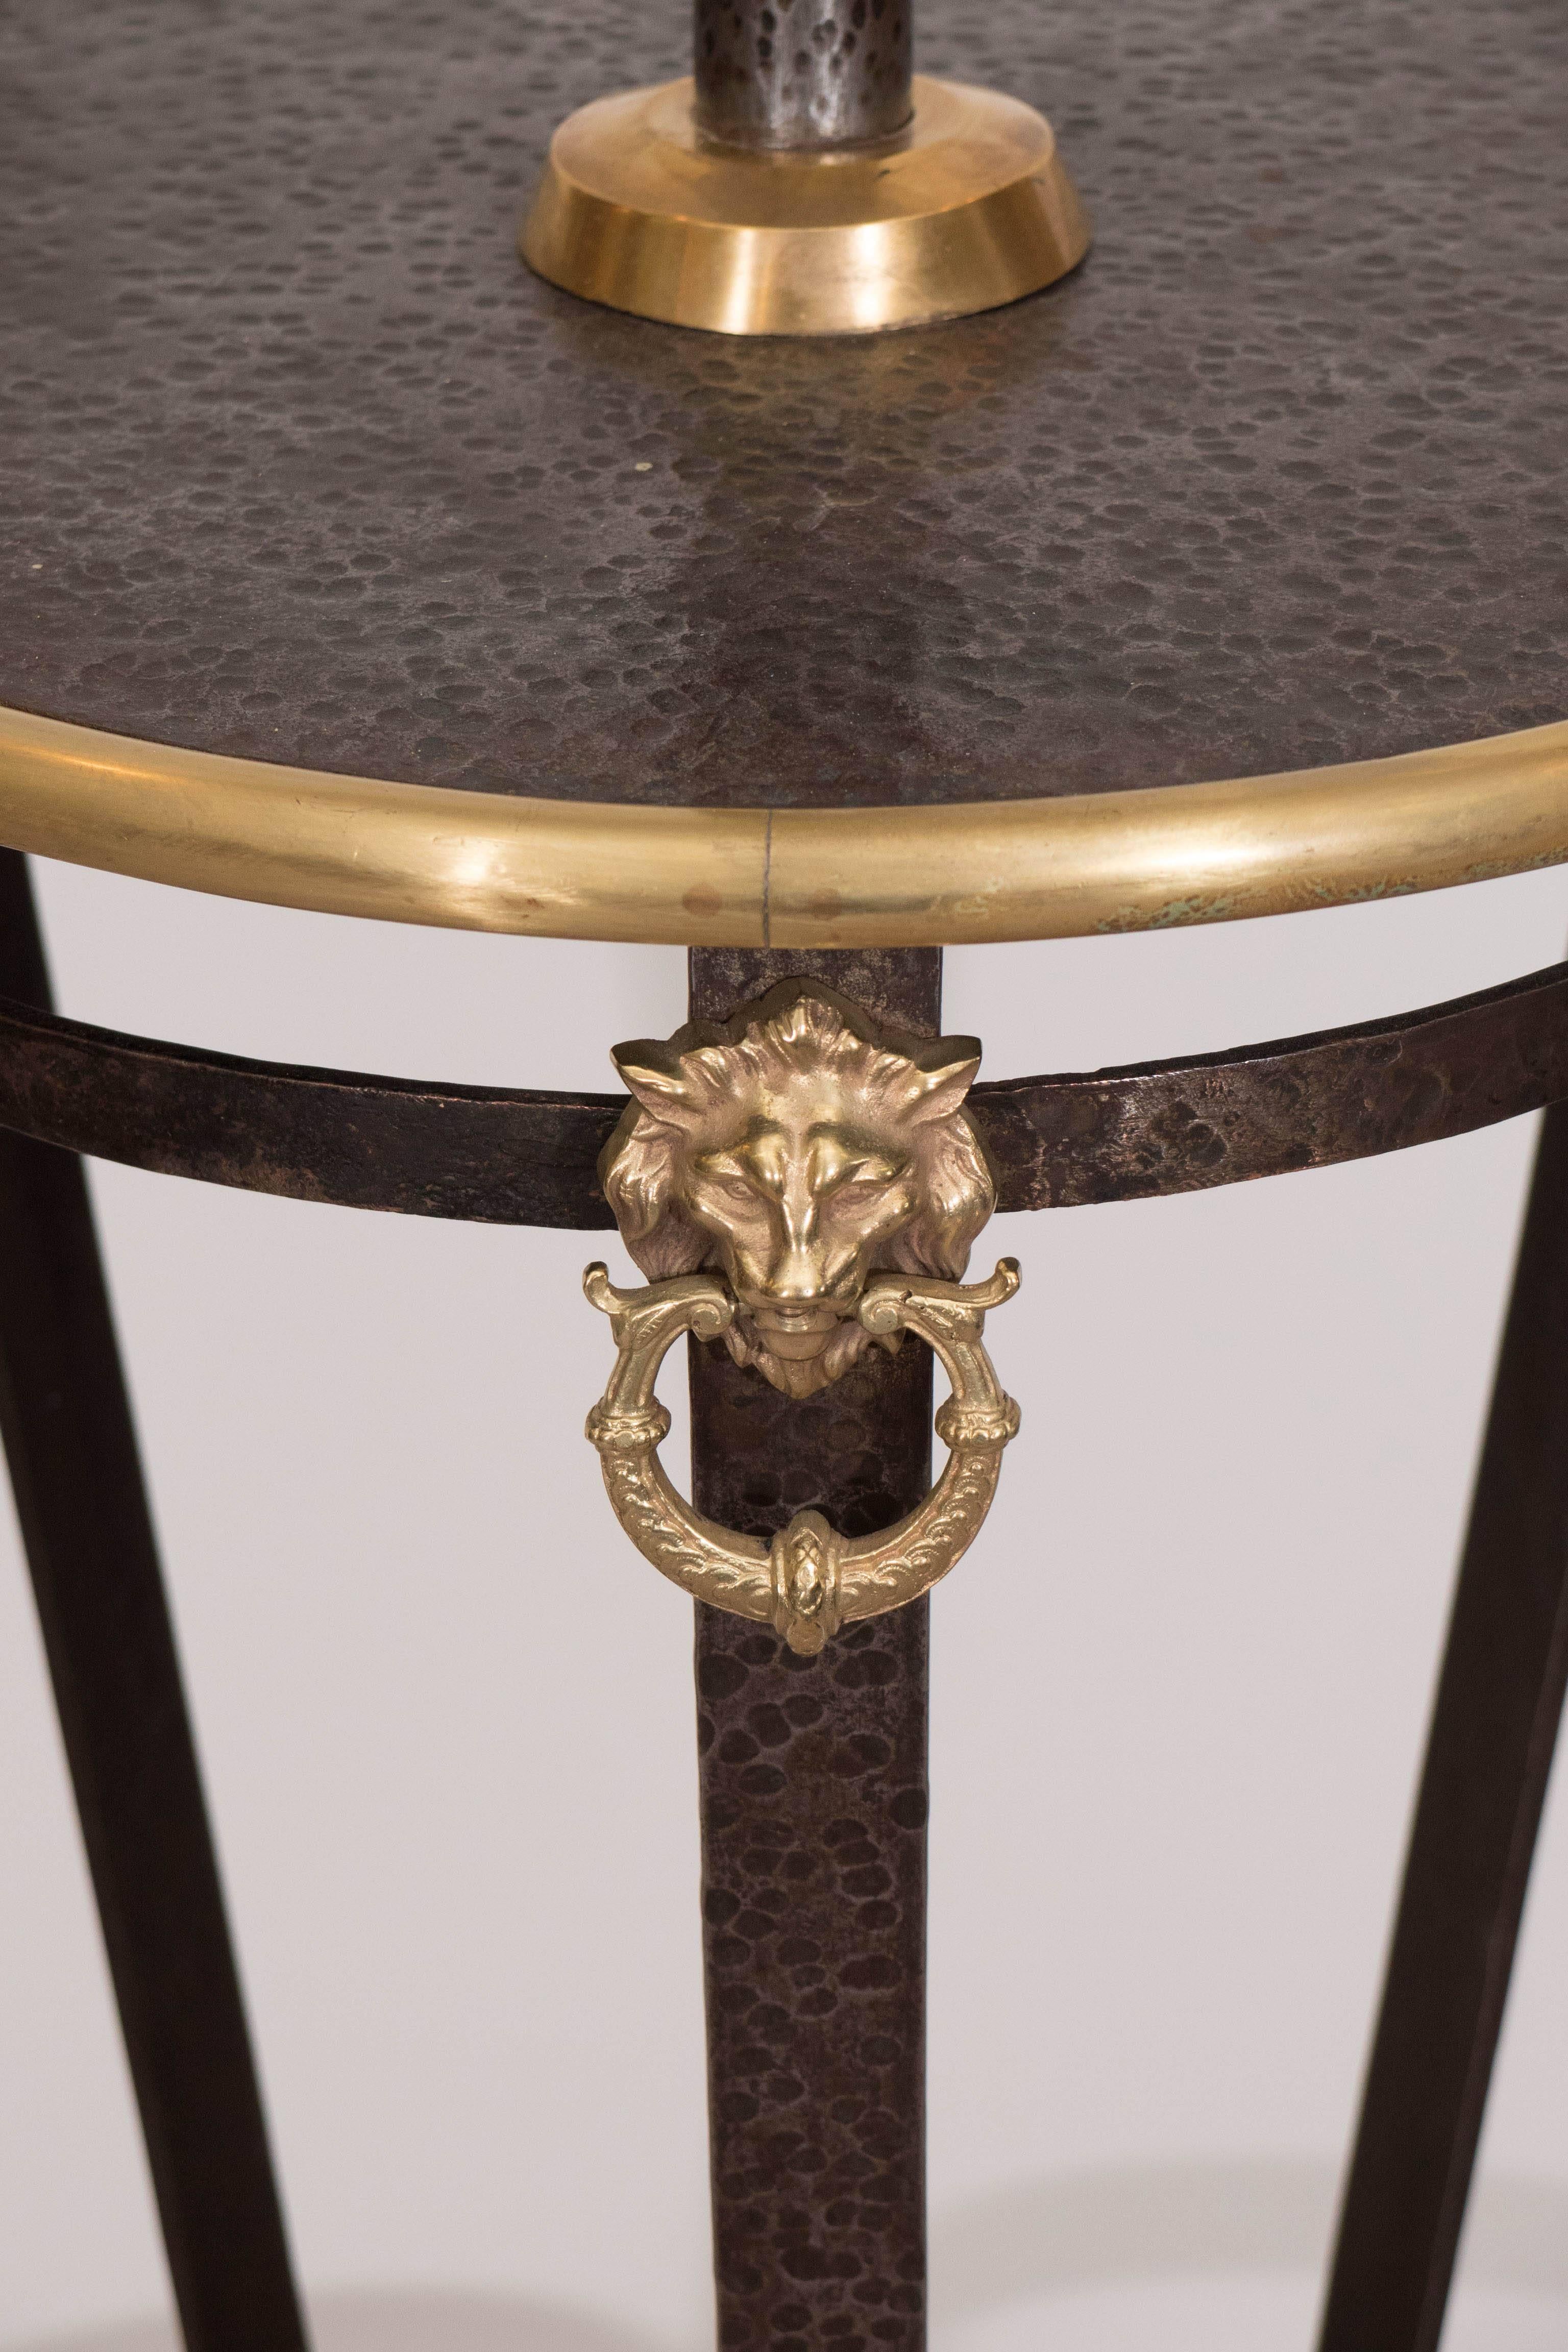 Art & Crafts Lamp Table in Hammered Iron with Brass Trim and Lion Heads Motif 3